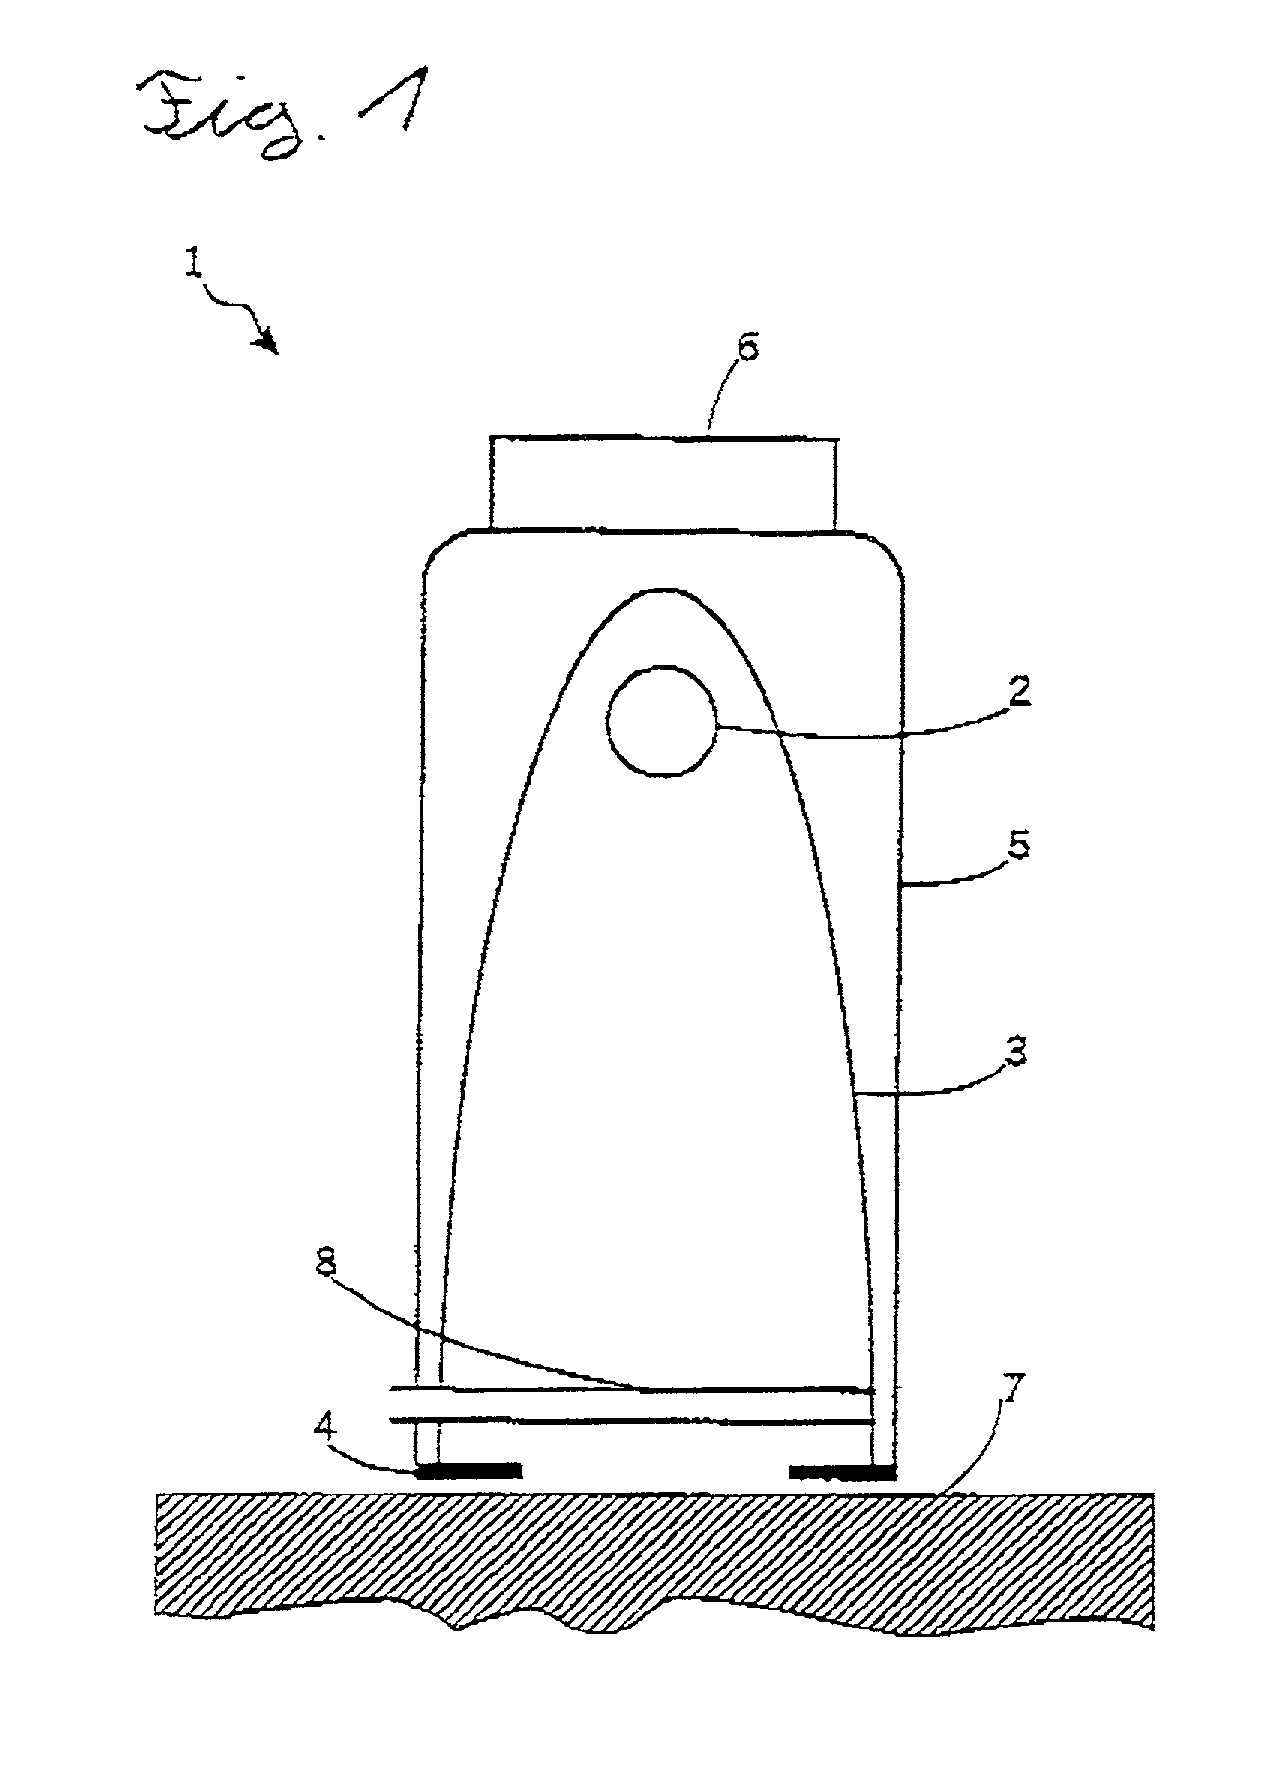 Irradiation device and method for the treatment of acne and acne scars